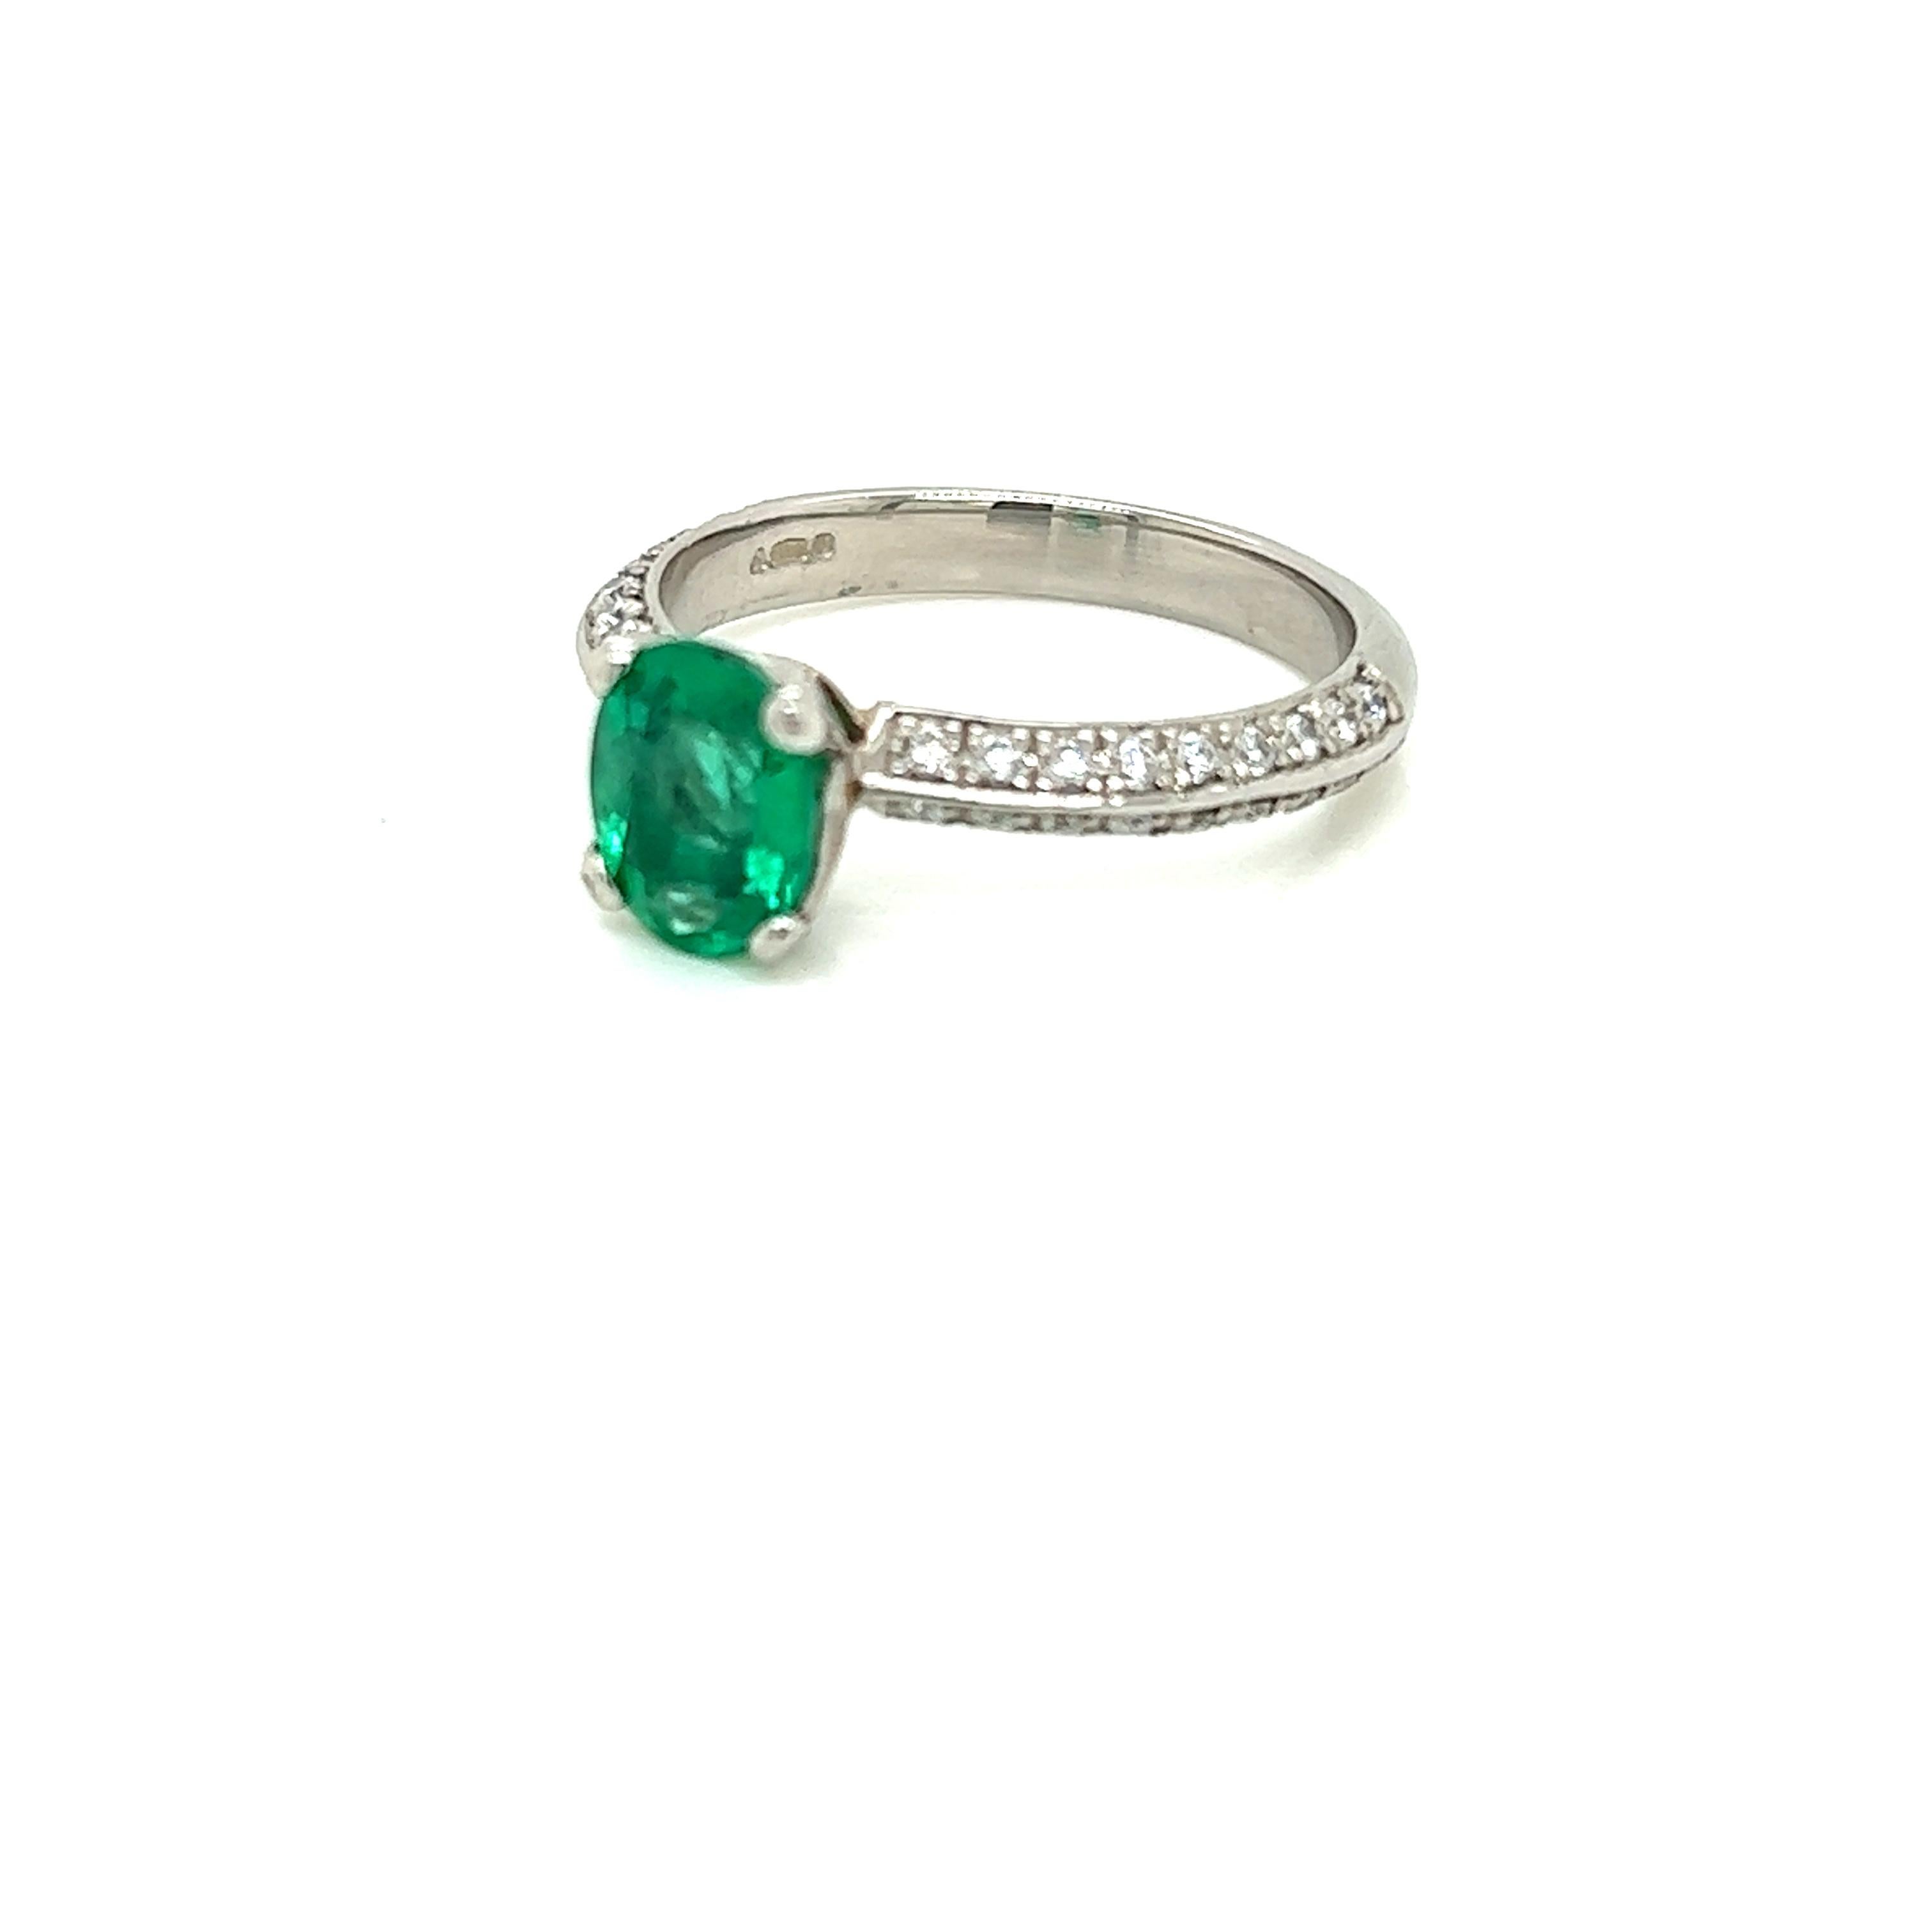 0.99 Carat Oval Emerald and Diamond Ring in Platinum

This spectacular ring features a gorgeous 0.99 carat Oval Emerald held in a claw setting on a Diamond encrusted Platinum band. The round brilliant diamonds on this beauty weigh a total of 0.28